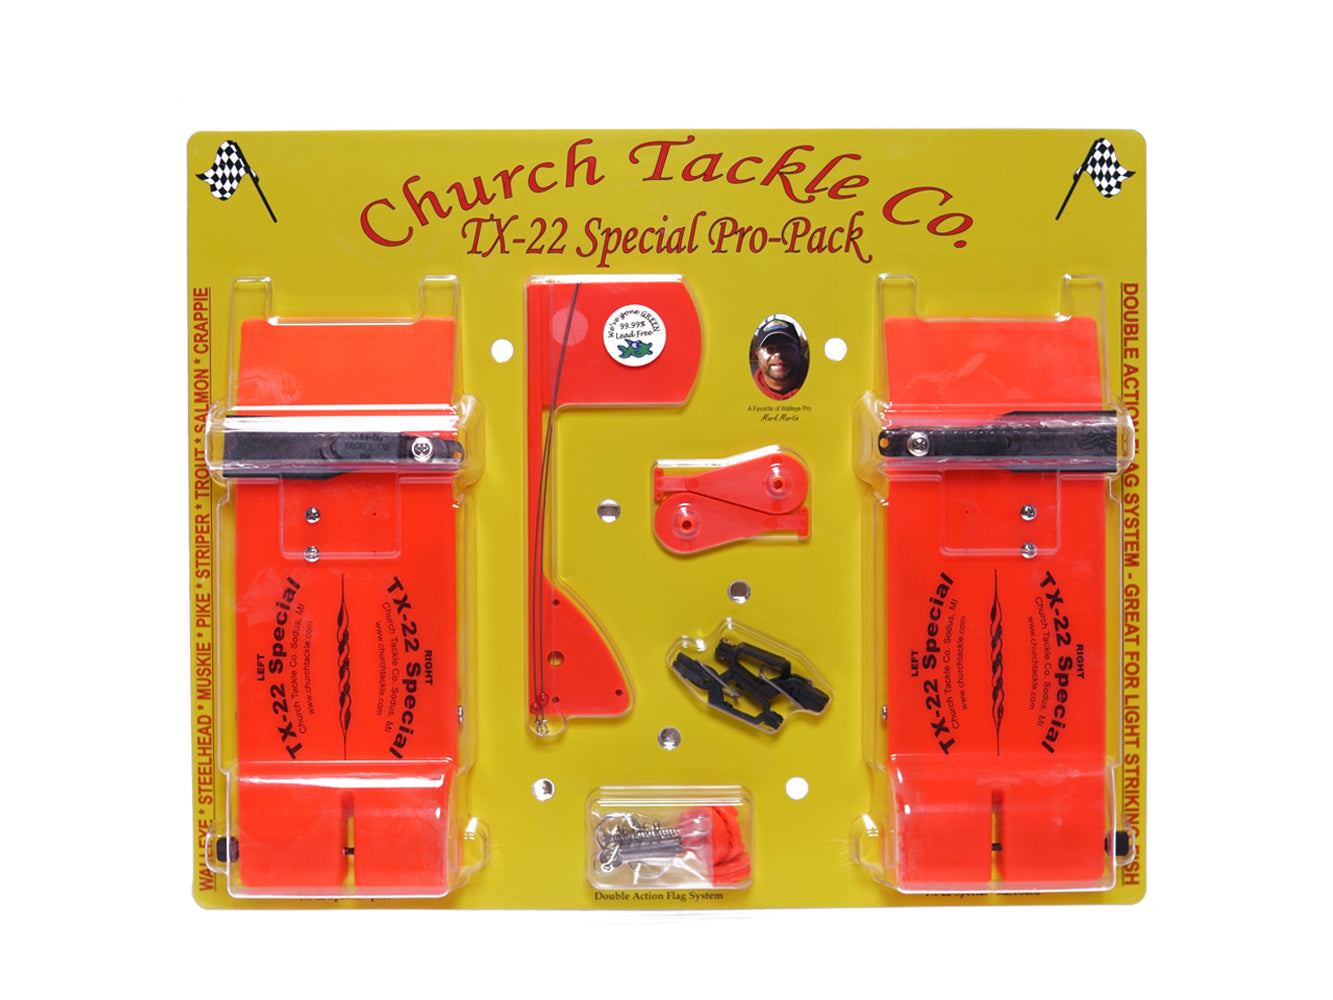 Church Tackle, TX-22 Special Pro-Pack, 2 Planer Boards w/ Flags